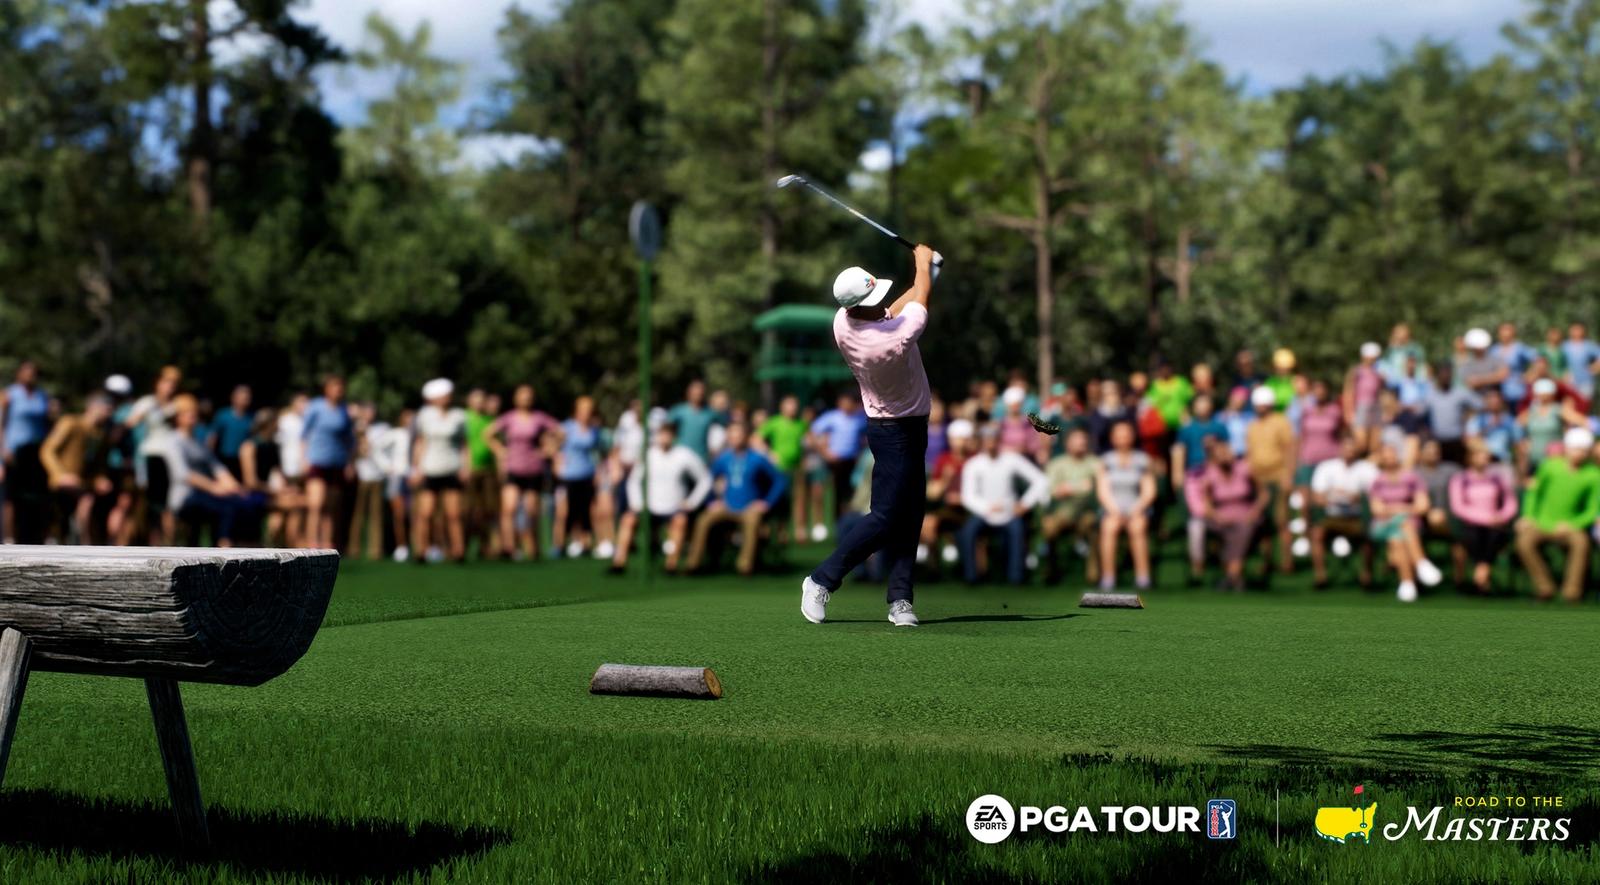 Image of the crowd and a player in PGA Tour